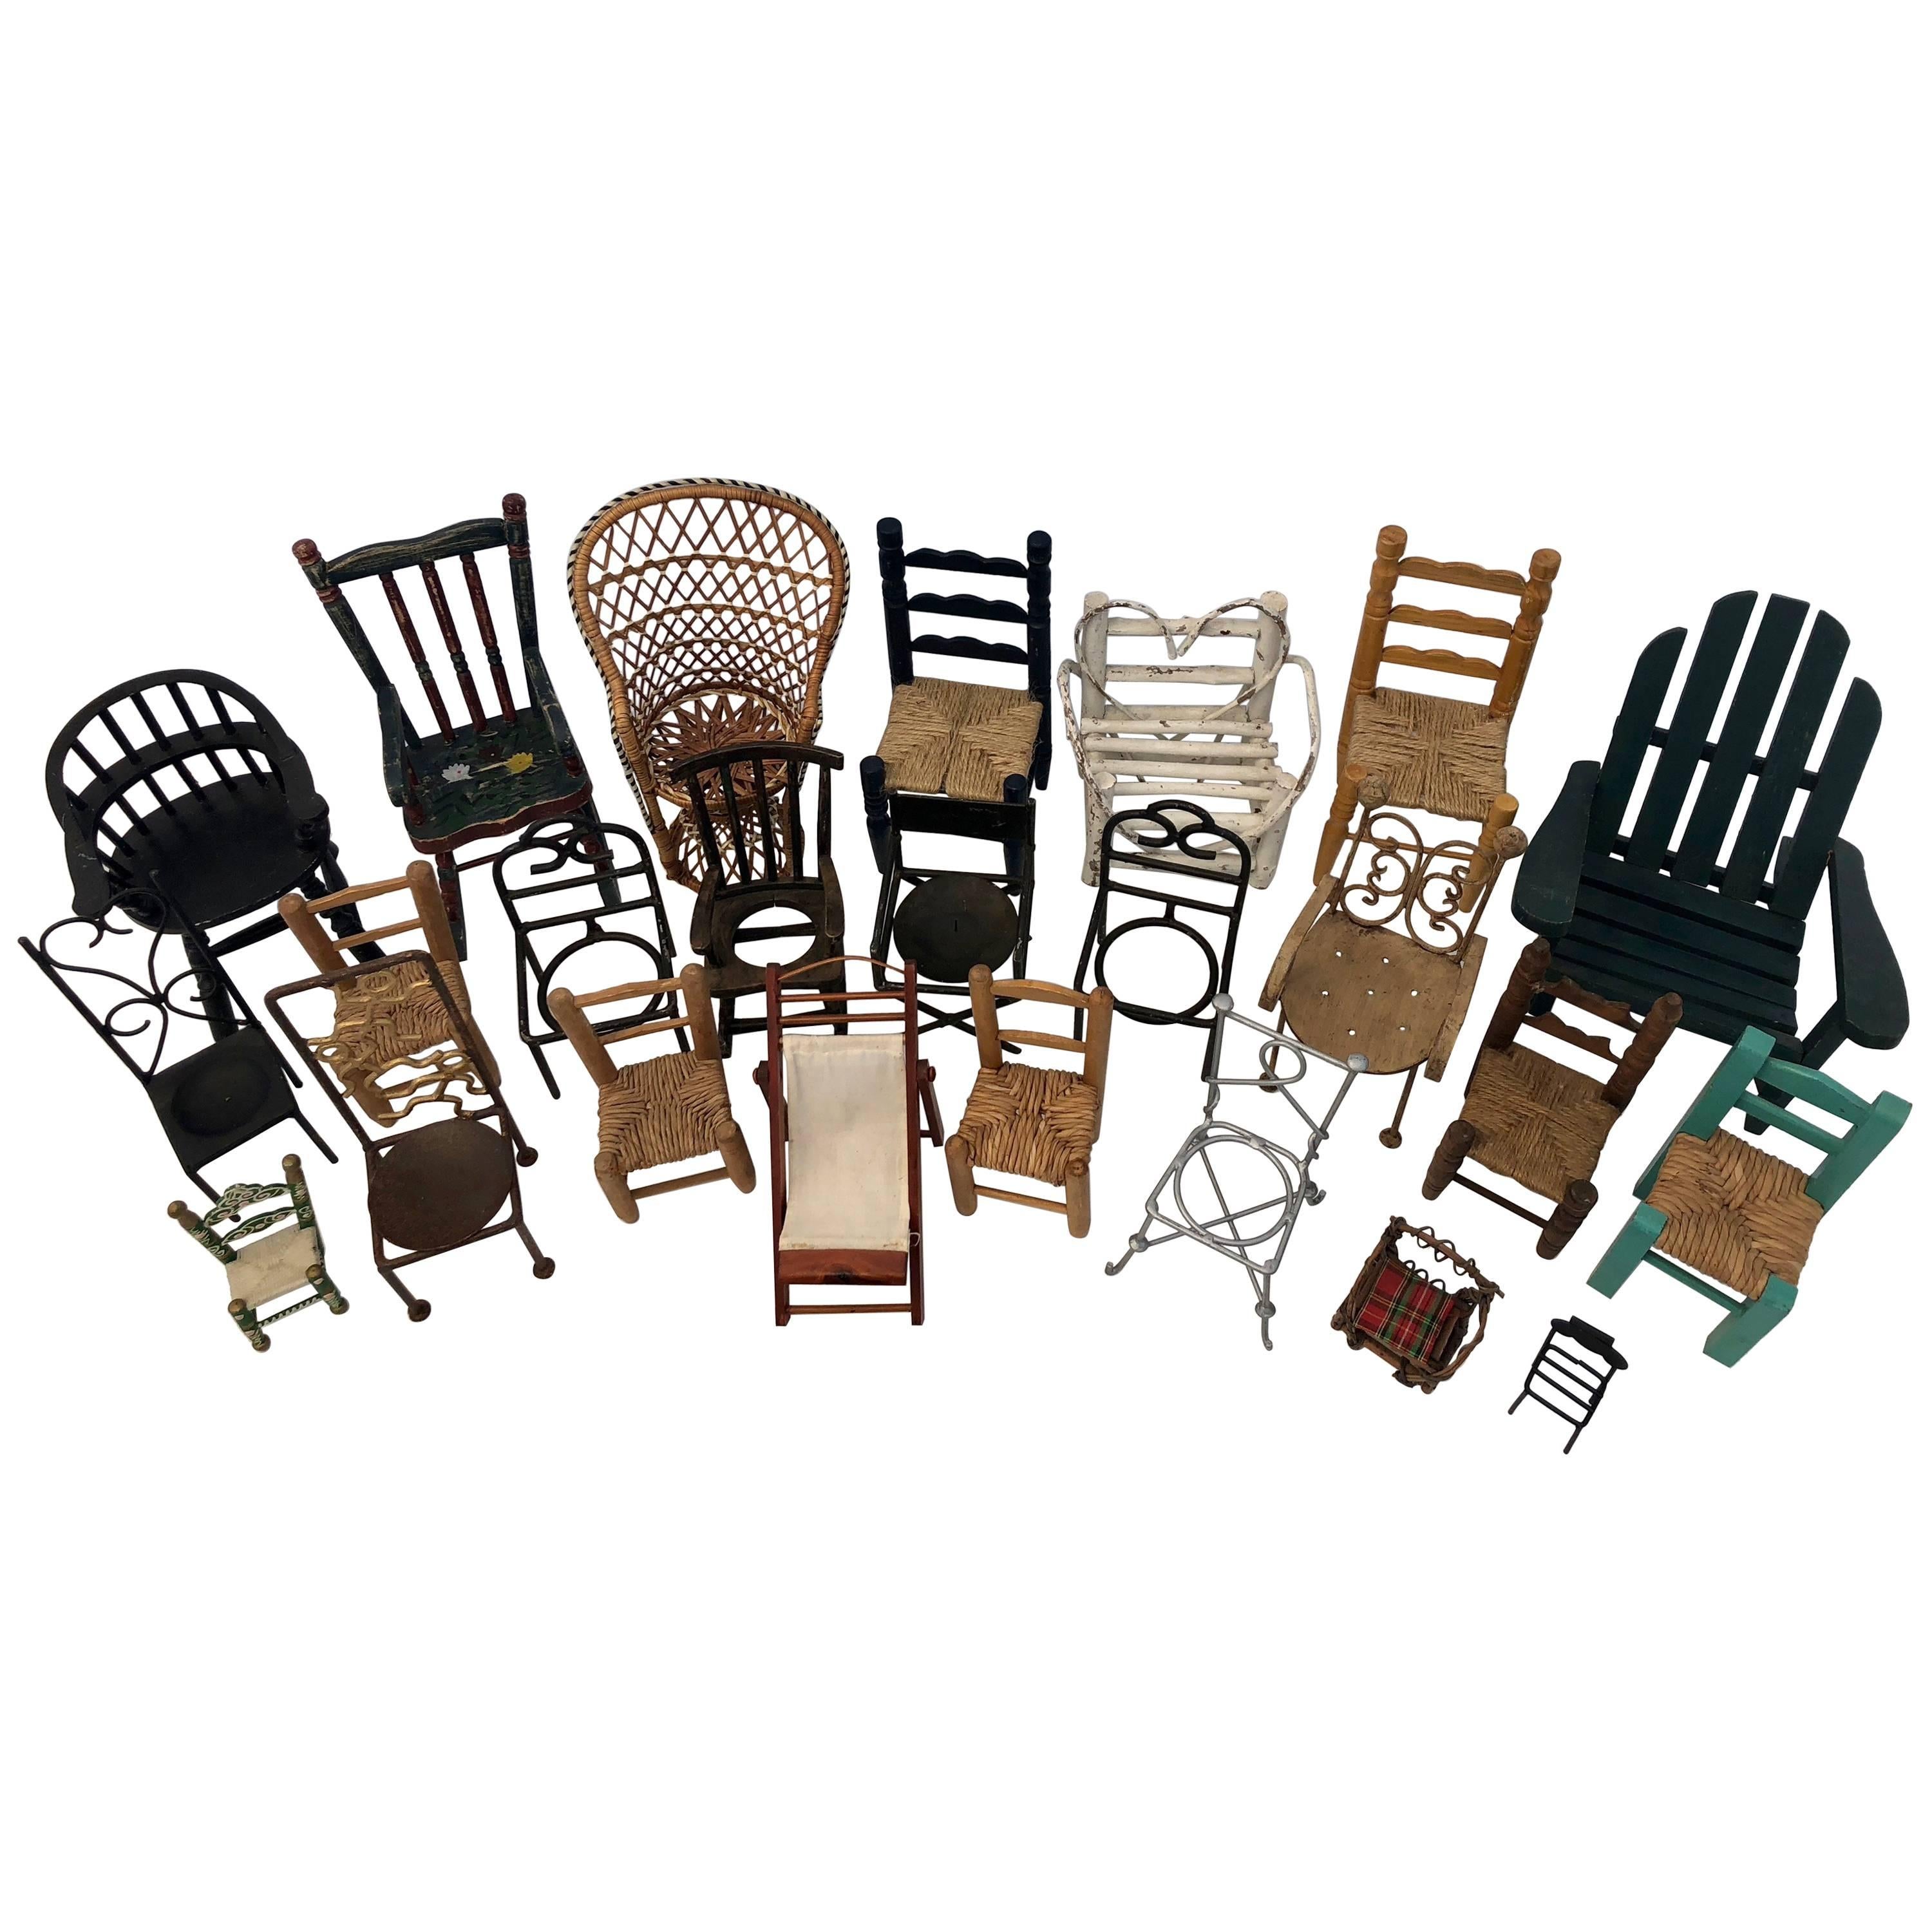 French Vintage Collection of 24 Miniature Chairs in Assorted Materials